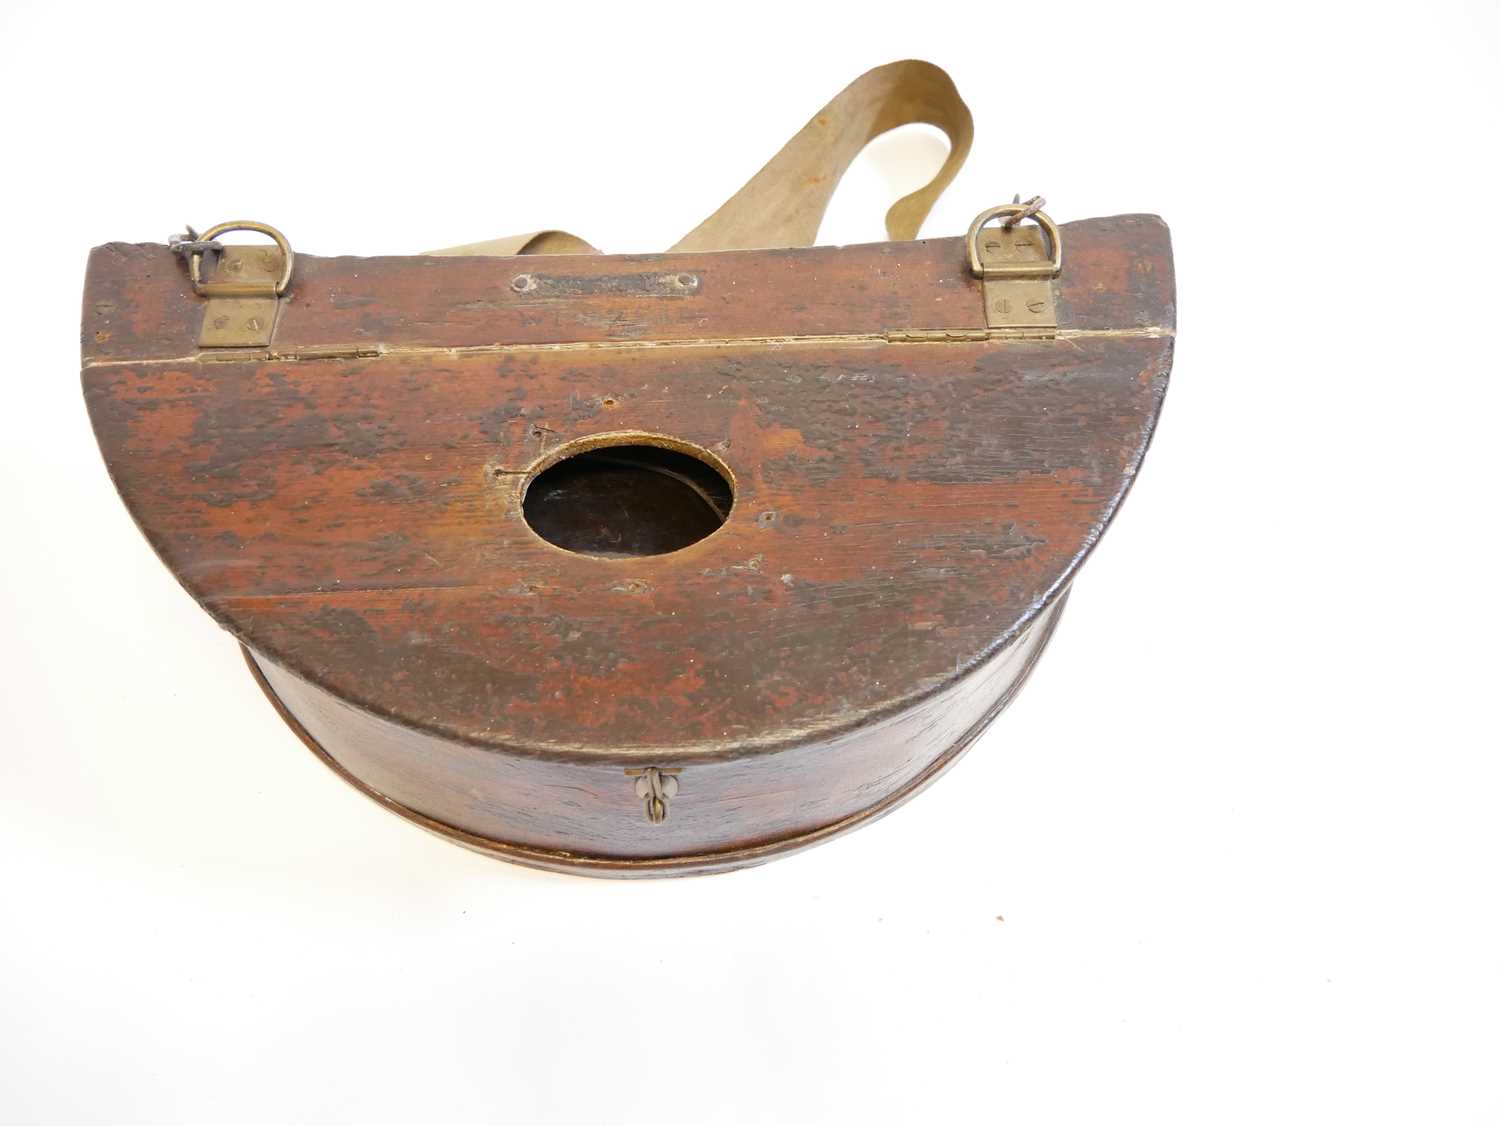 Antique steamed wood fishing creel with coarse fisher’s tackle and wooden reel - Image 12 of 14